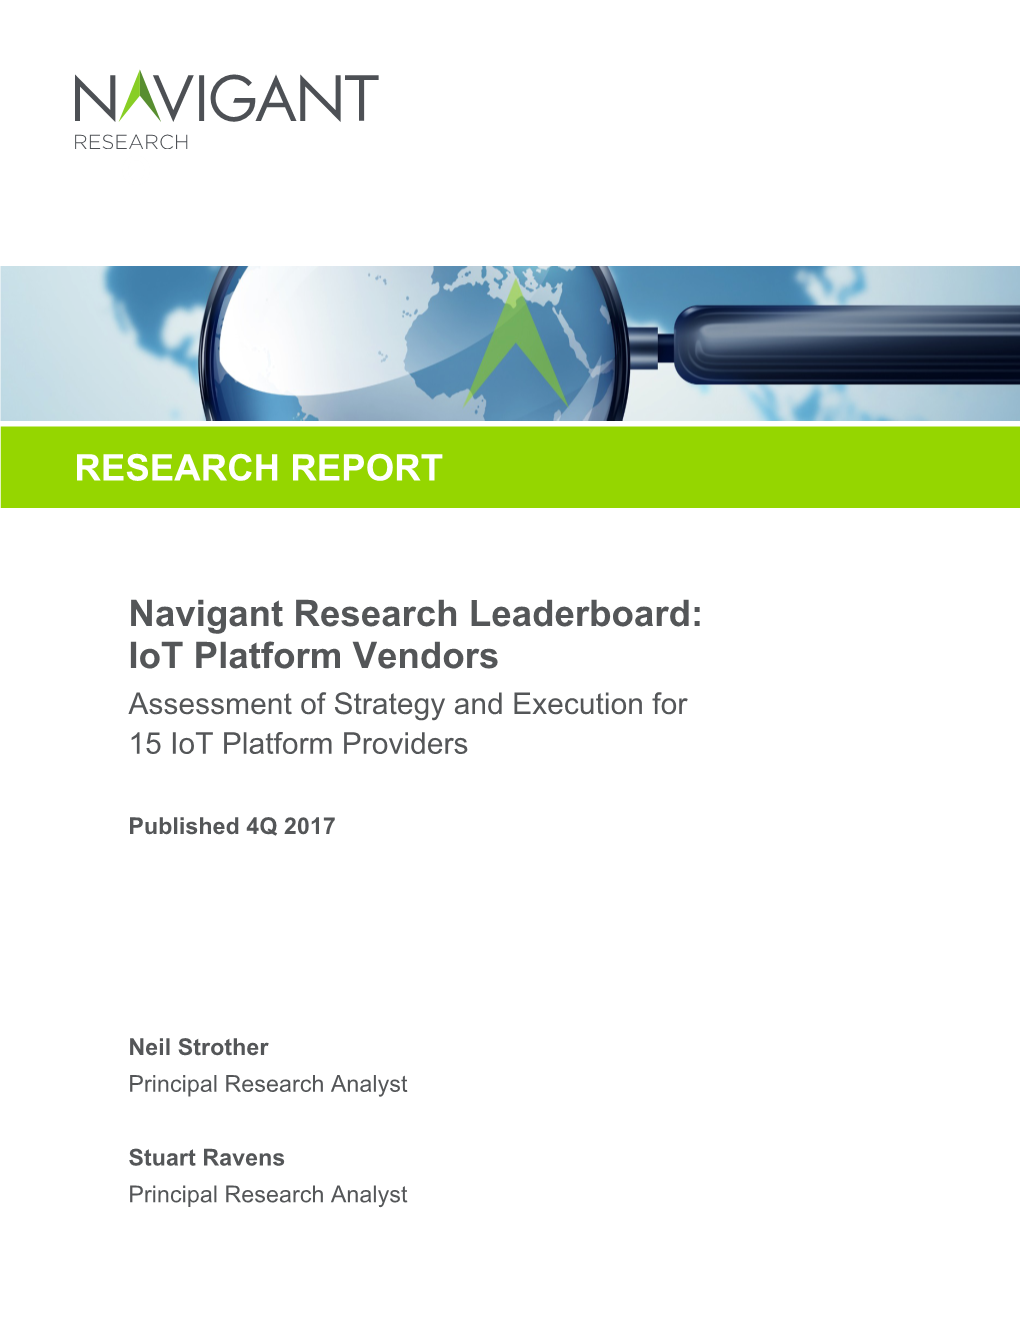 Navigant Research Leaderboard: Iot Platform Vendors Assessment of Strategy and Execution for 15 Iot Platform Providers